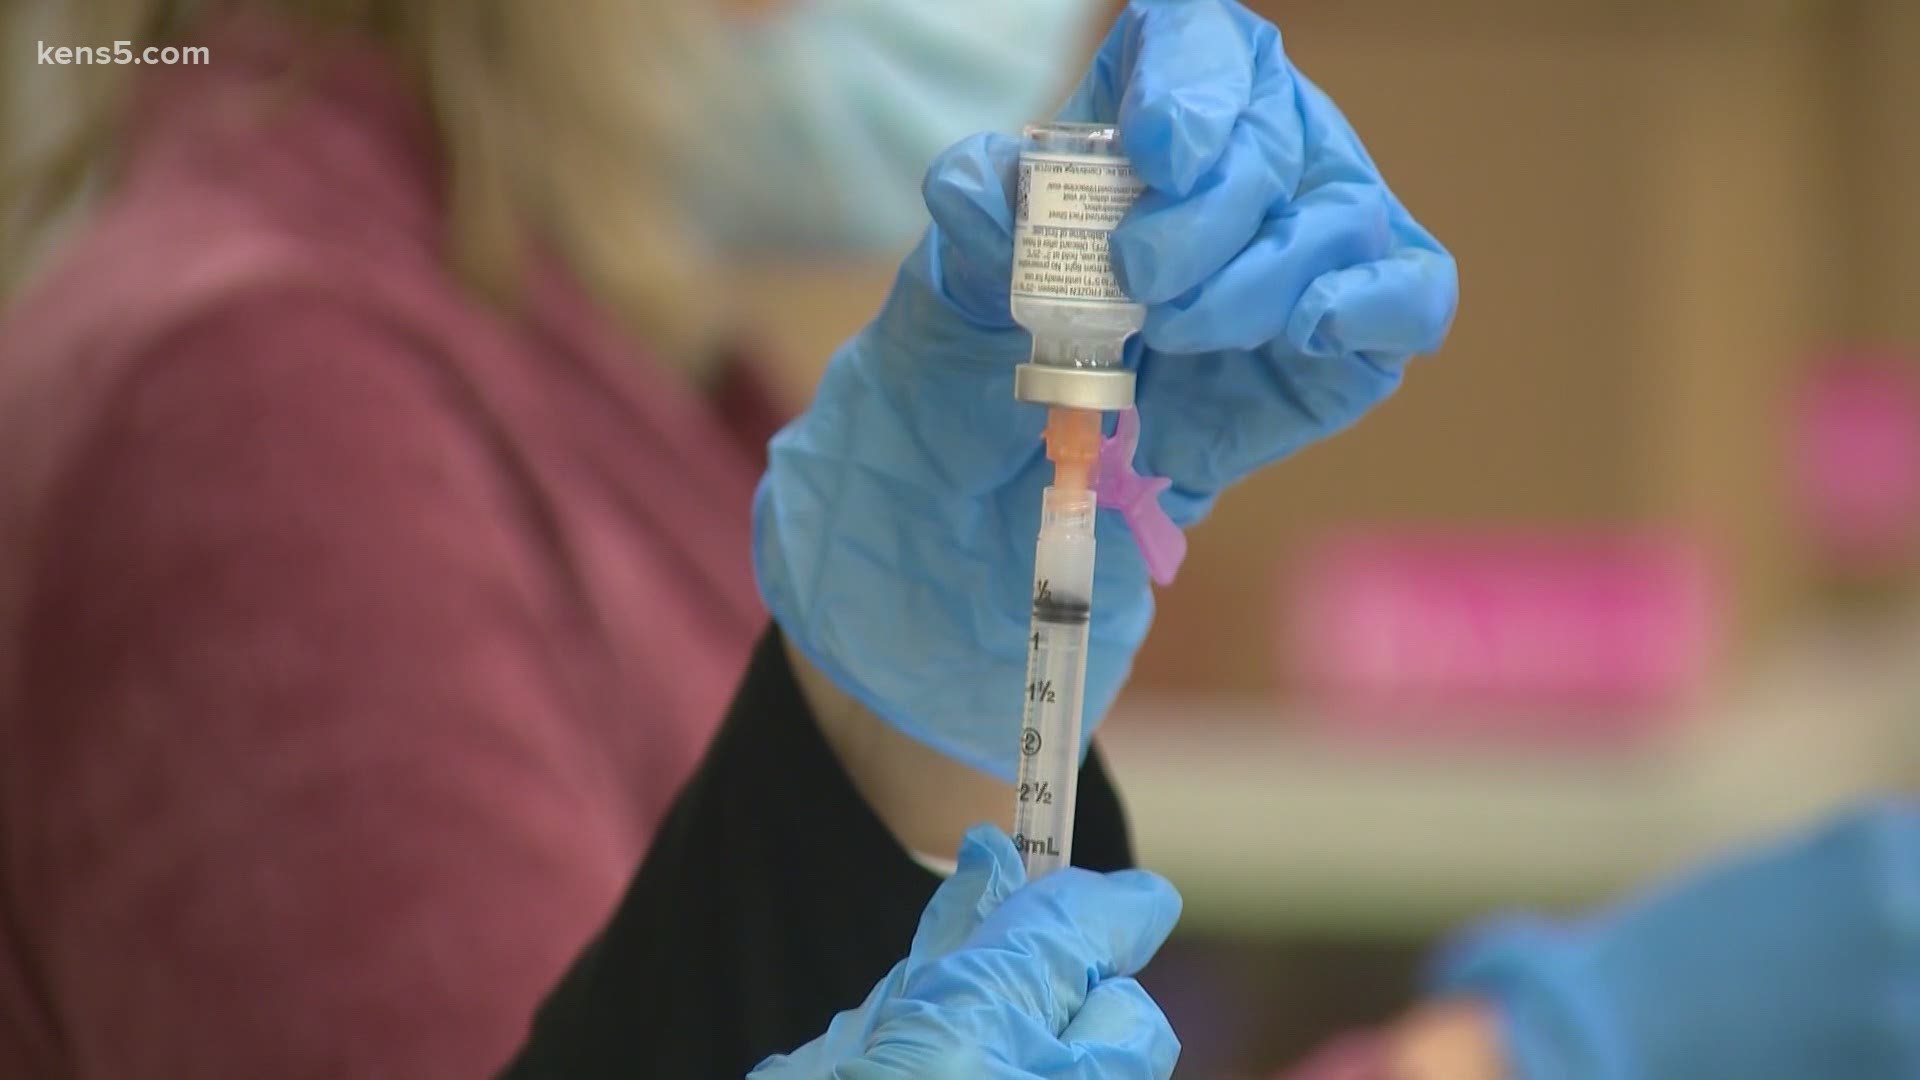 As coronavirus cases in Bexar County continue to rise, mass vaccination efforts continue. And WellMed announced their plans to reopen their vaccination hotline.